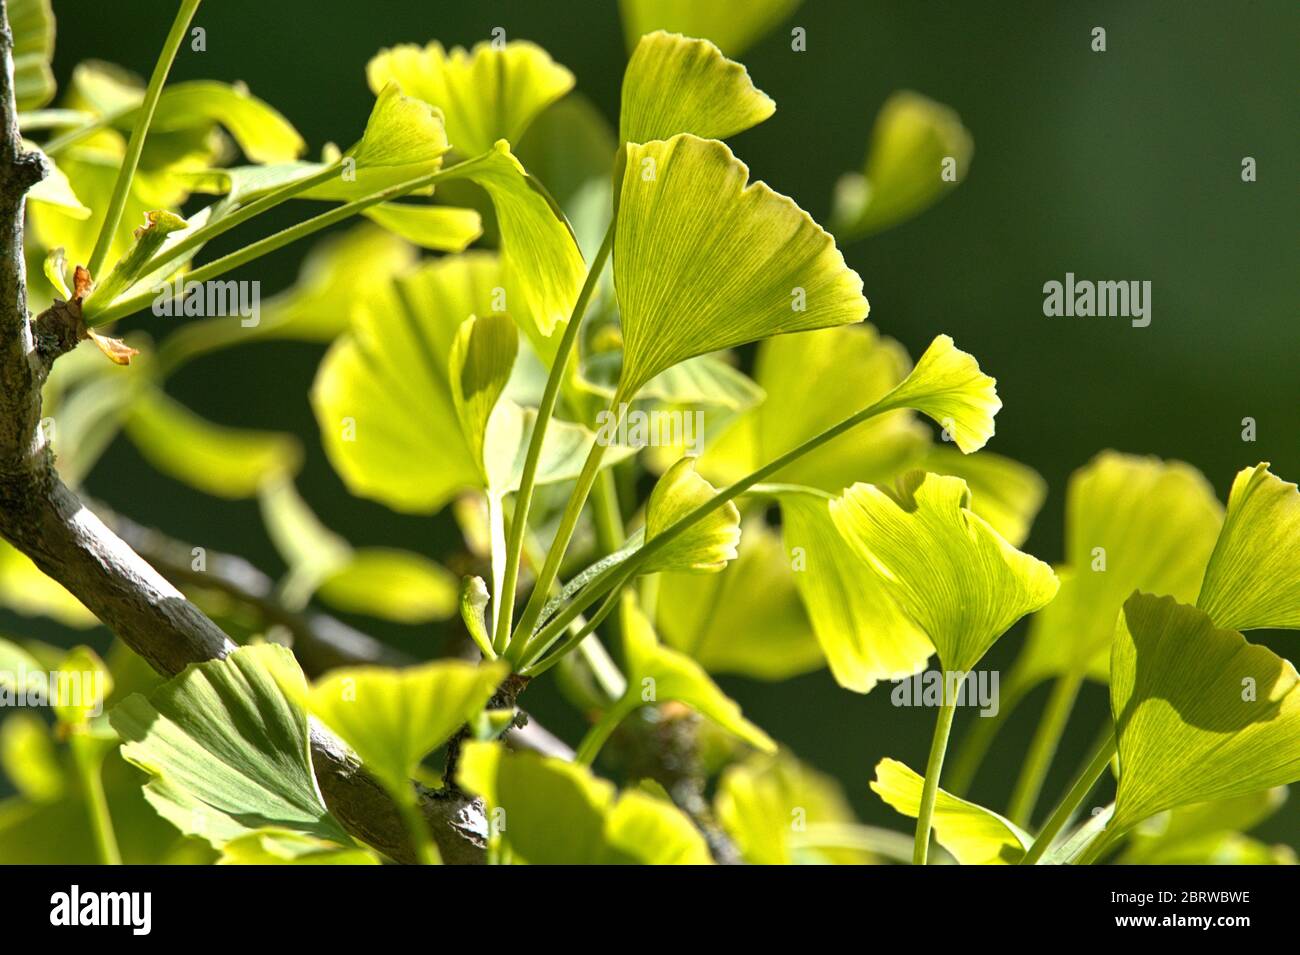 May 19, 2020, Schleswig-Holstein, Schleswig: Close-up of some freshly sprouting ginkgo leaves on a ginkgo tree in spring. Class: Ginkgo plants (Ginkgoopsida), order: Ginkgoales, family: Ginkgo waxes, genus: Ginkgo, species: Ginkgo | usage worldwide Stock Photo